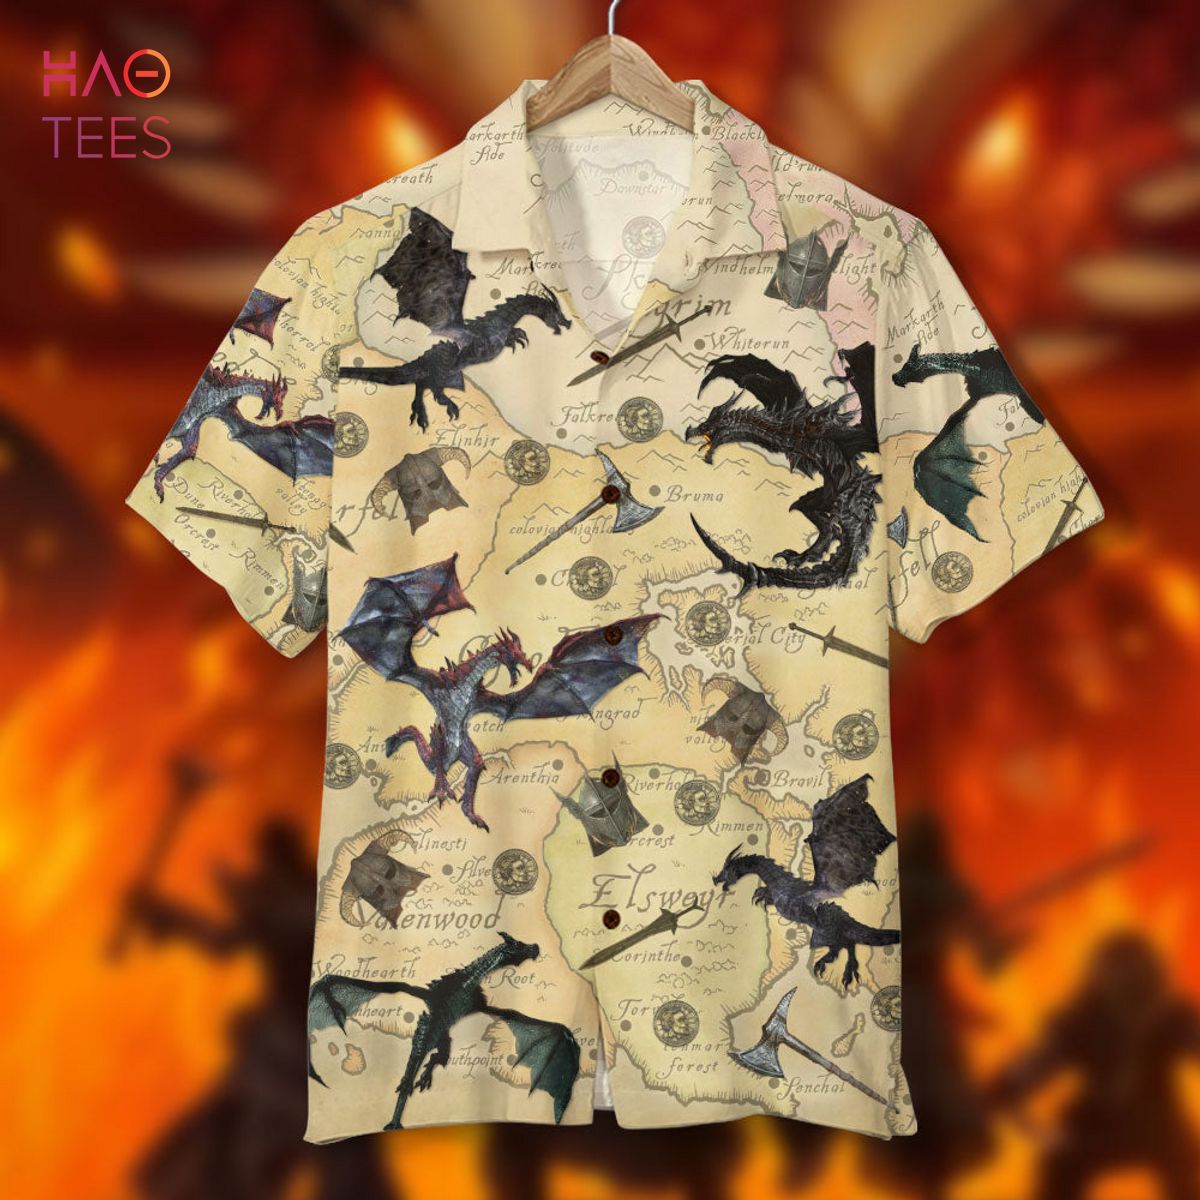 Skyrim The Game with Dragons and Old Tamriel Map Pattern Hawaiian Shirt